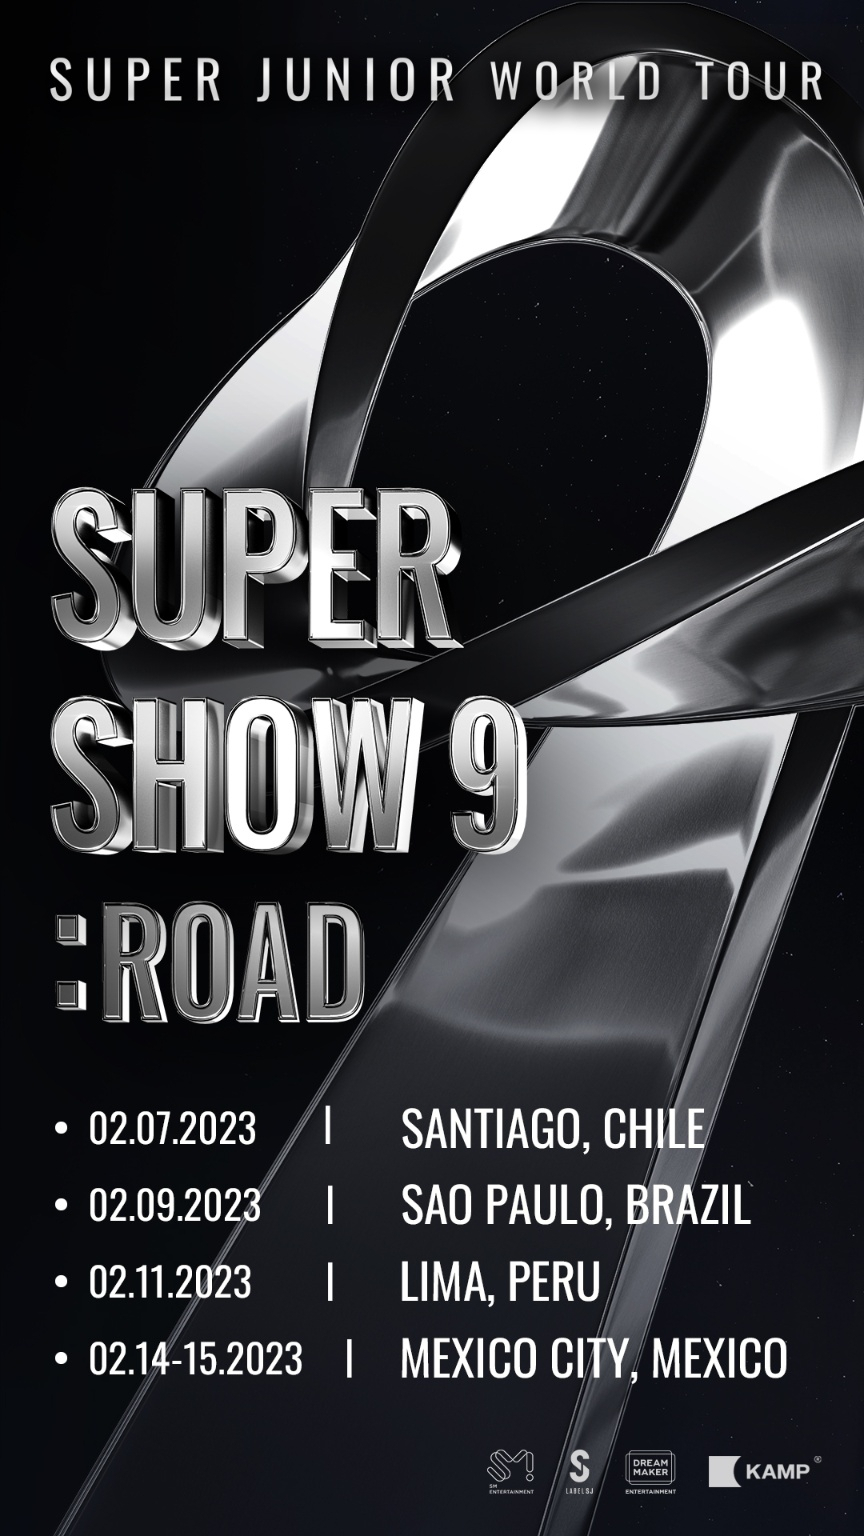 Poster of Super Junior's world tour schedule in Latin America (HNS HQ)